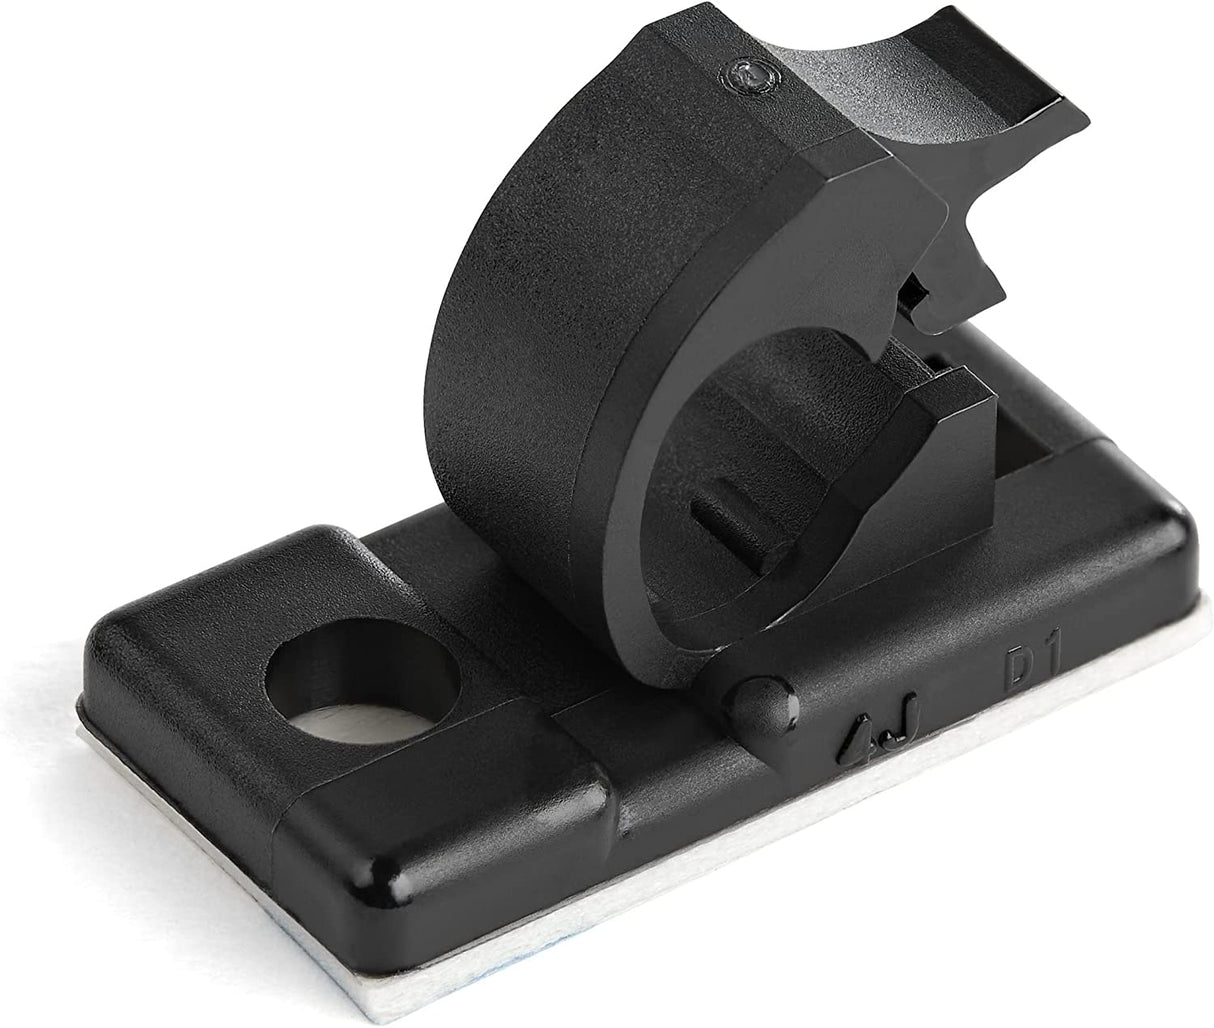 StarTech.com 100 Adhesive Cable Management Clips Black - Network/Ethernet/Office Desk/Computer Cord Organizer - Sticky Cable/Wire Holders - Nylon Self Adhesive Clamp UL/94V-2 Fire Rated (CBMCC1) Small | 0.21 in. (5.5 mm) max. diameter